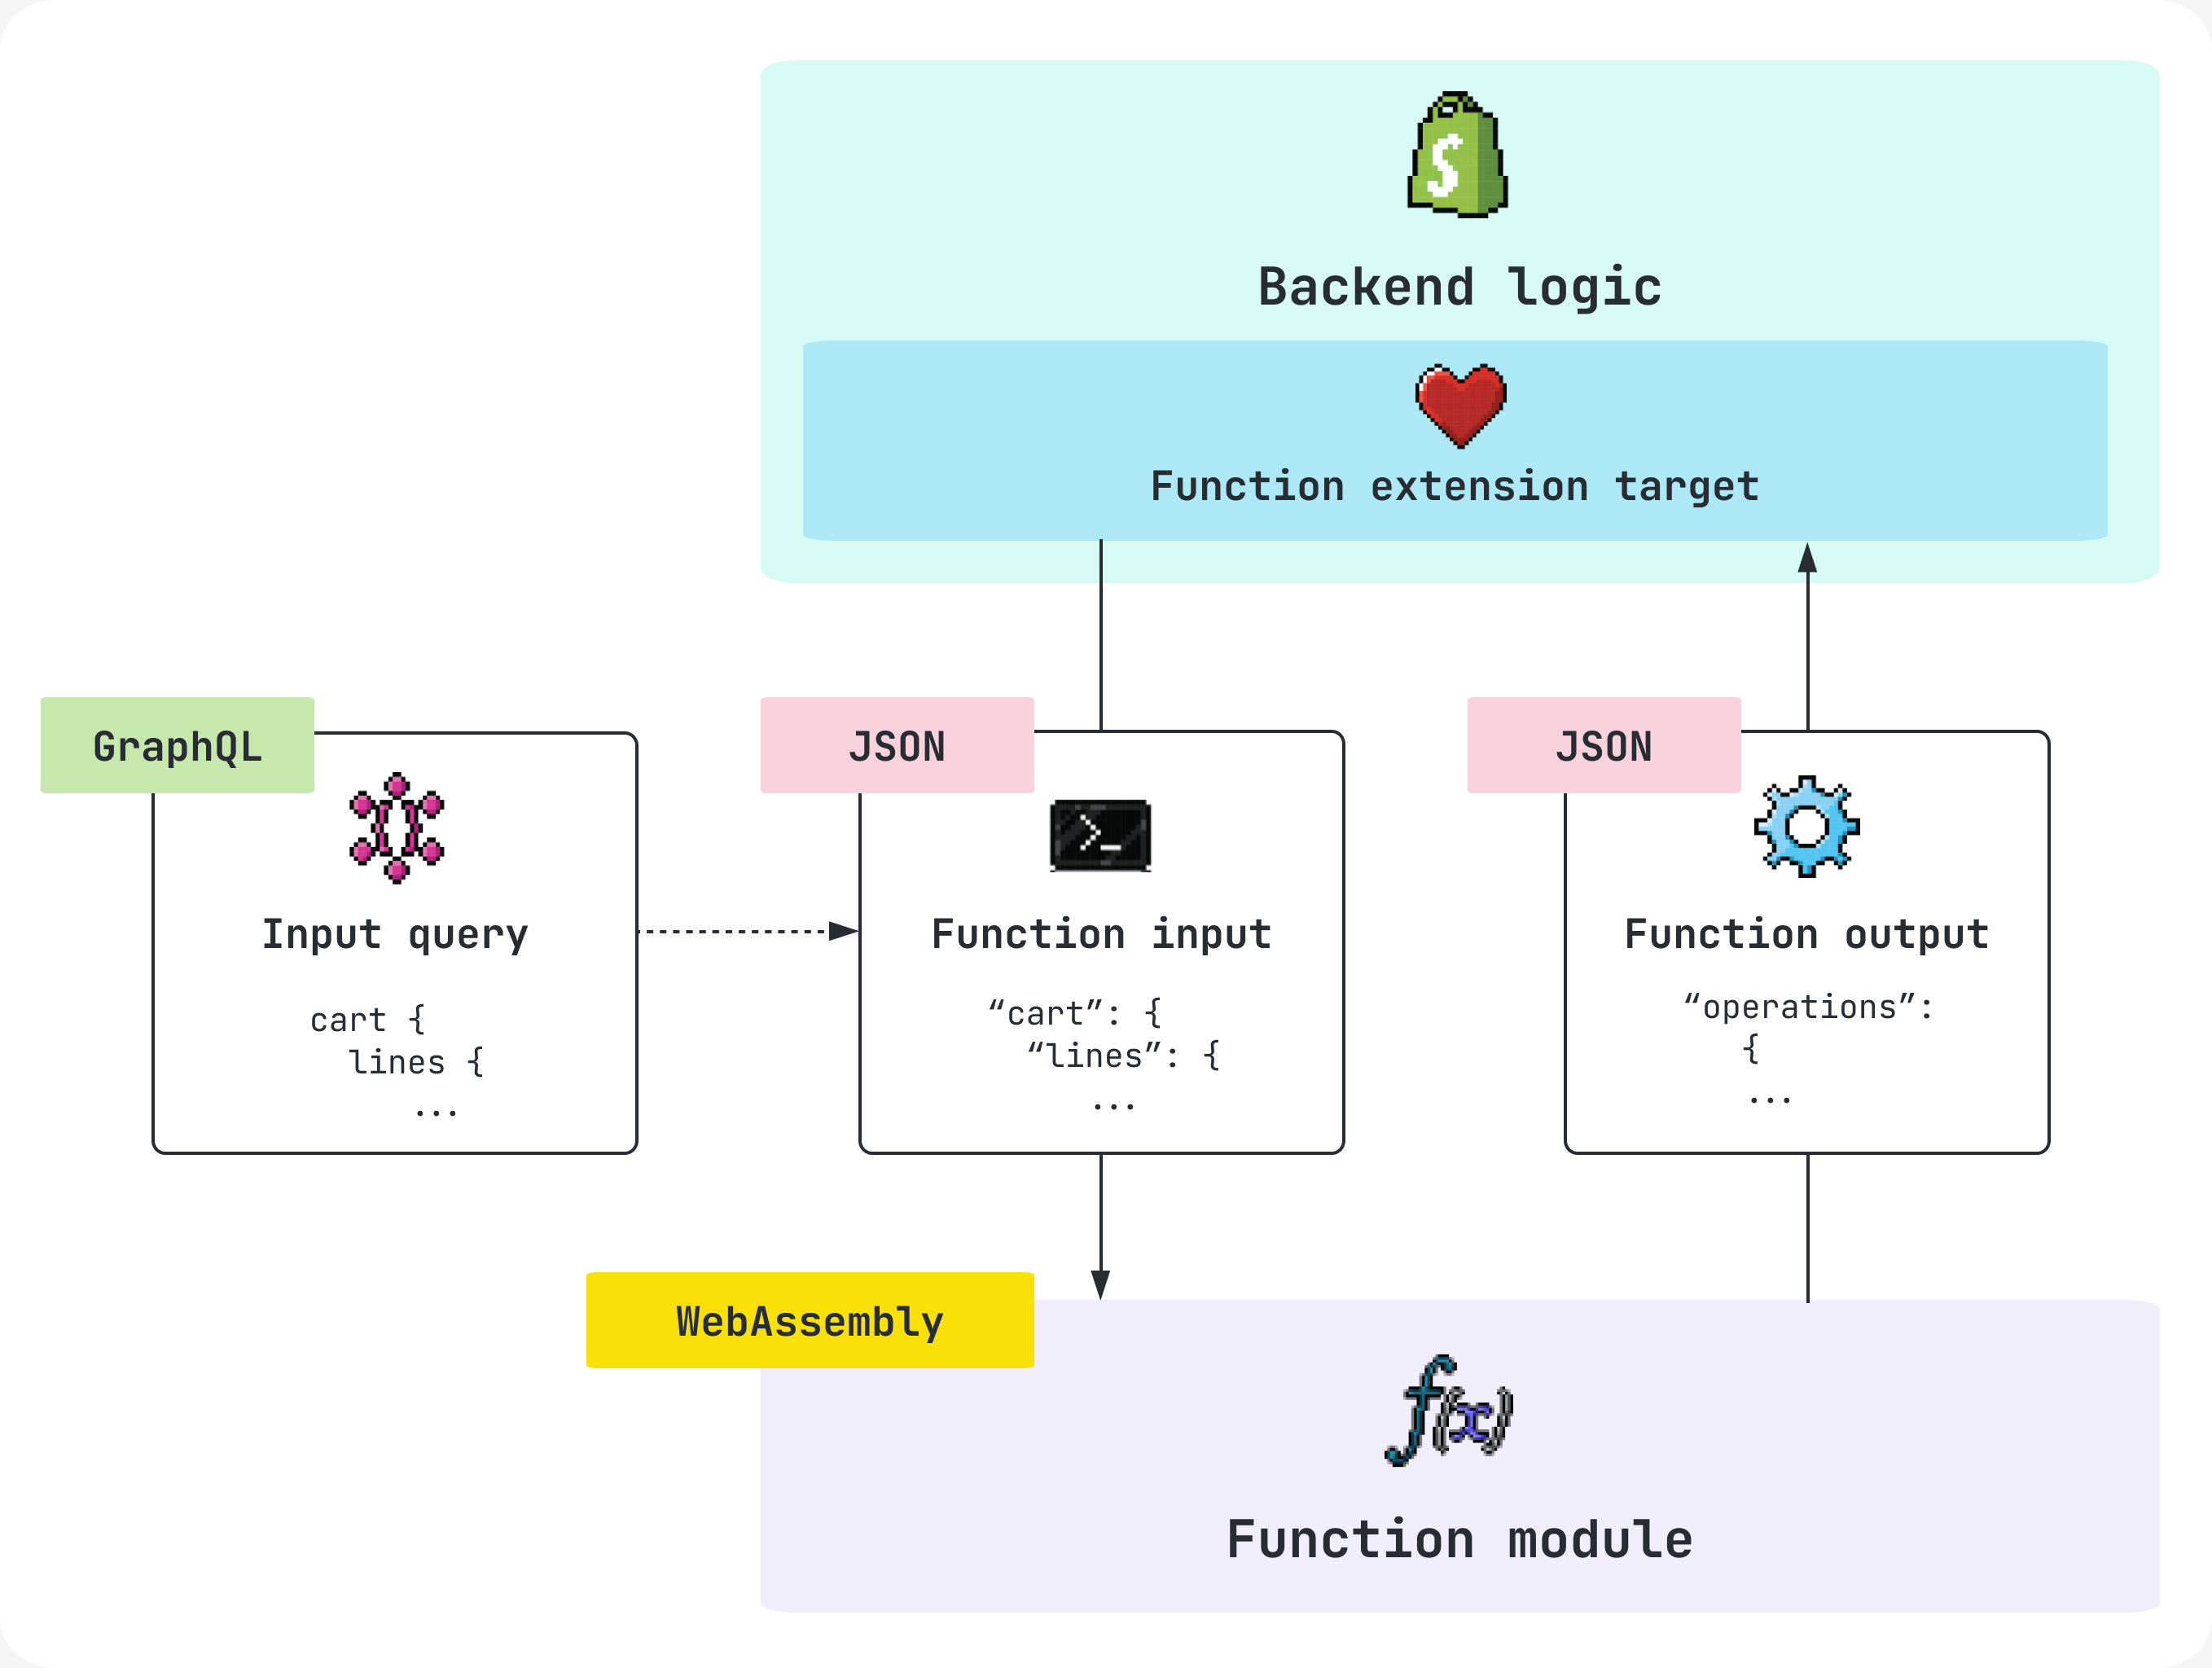 A diagram showing how Shopify invokes a function which has been configured for an extension target.